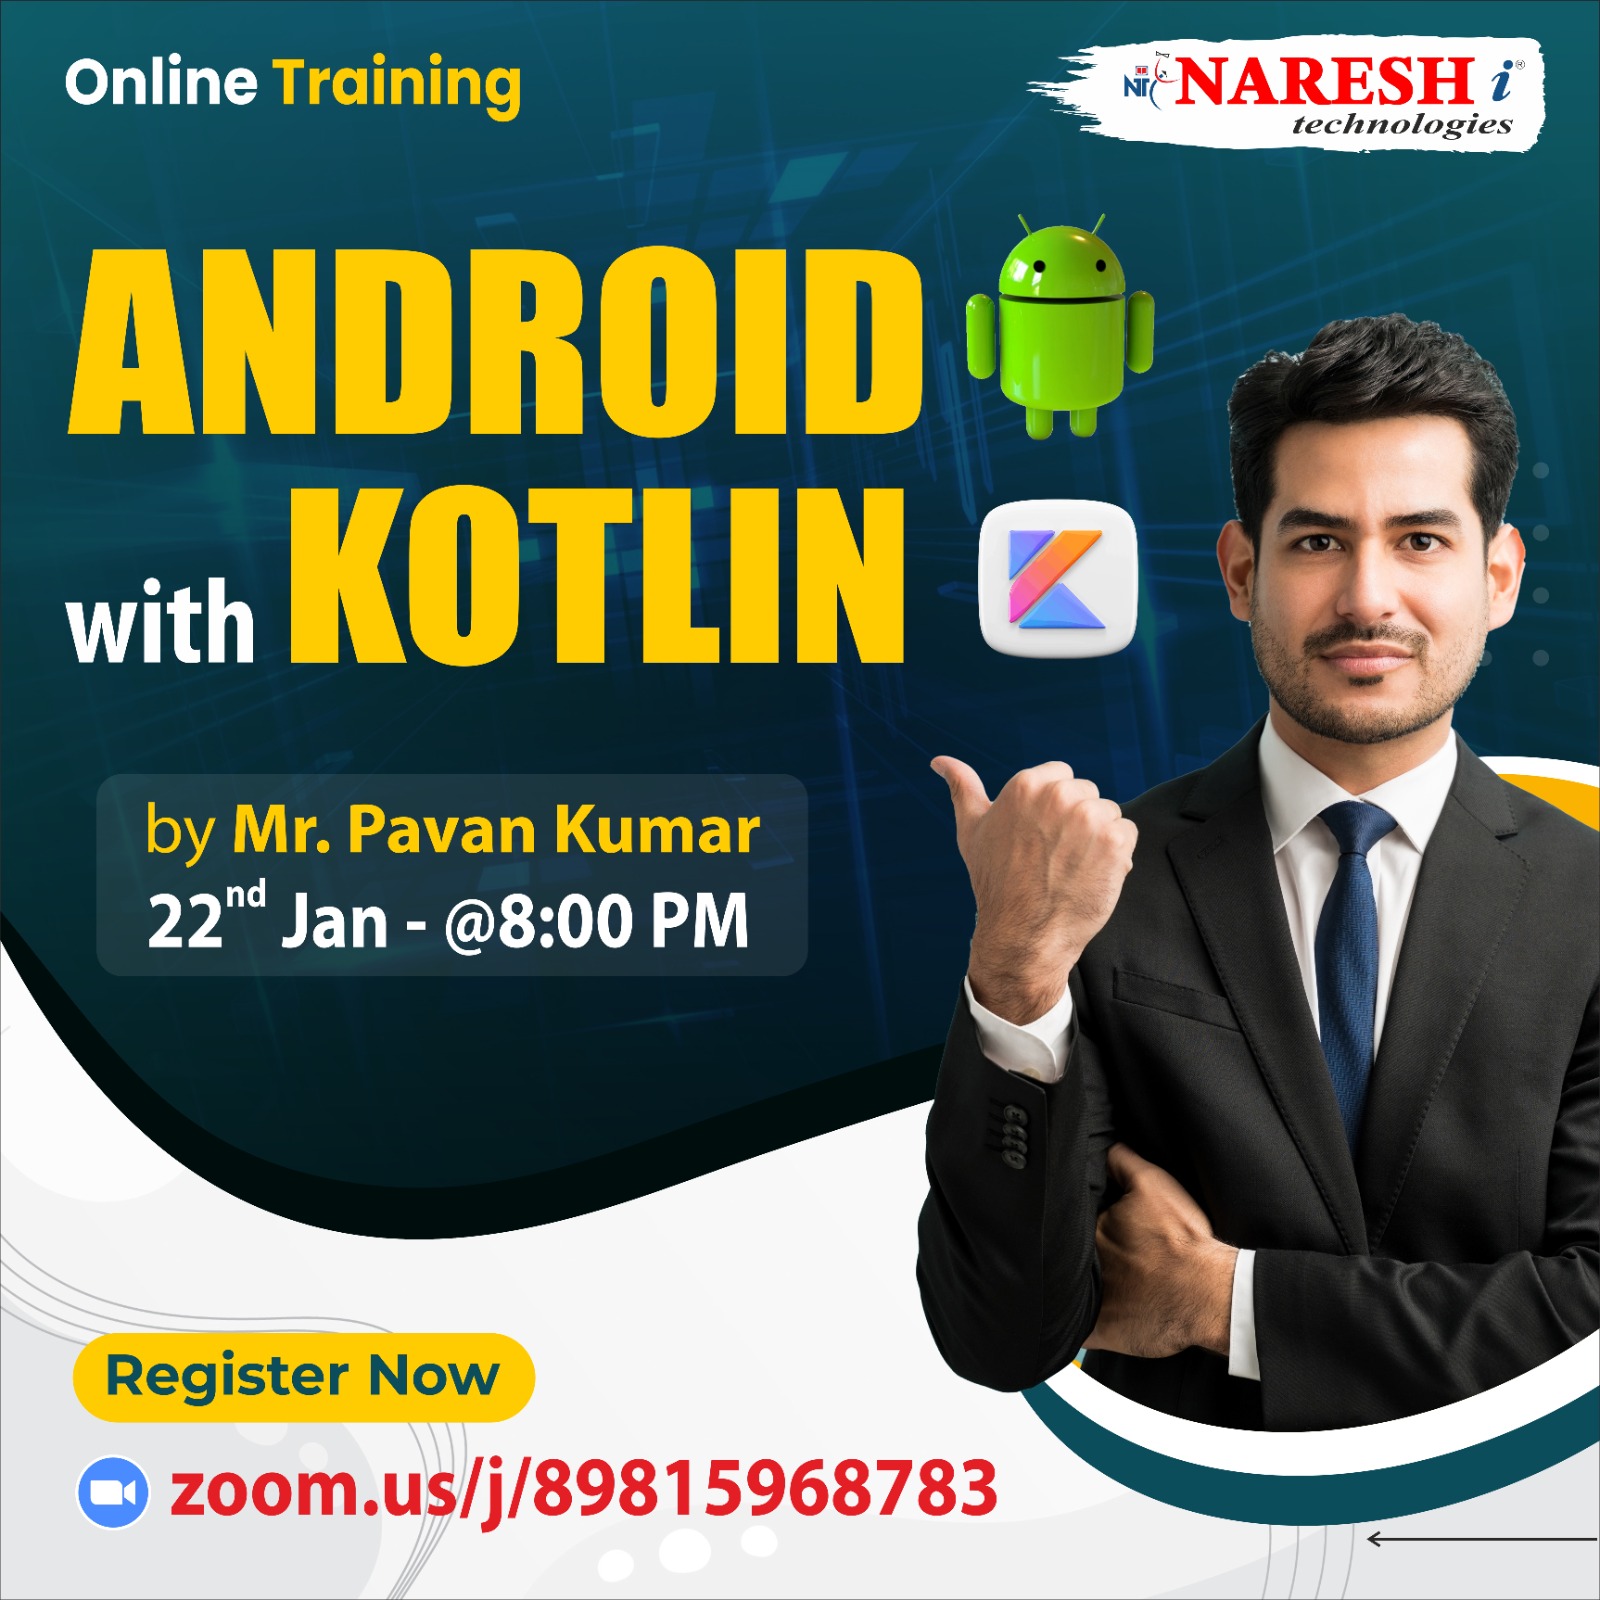 Learn Android with Kotlin Online Training in NareshIT, Online Event